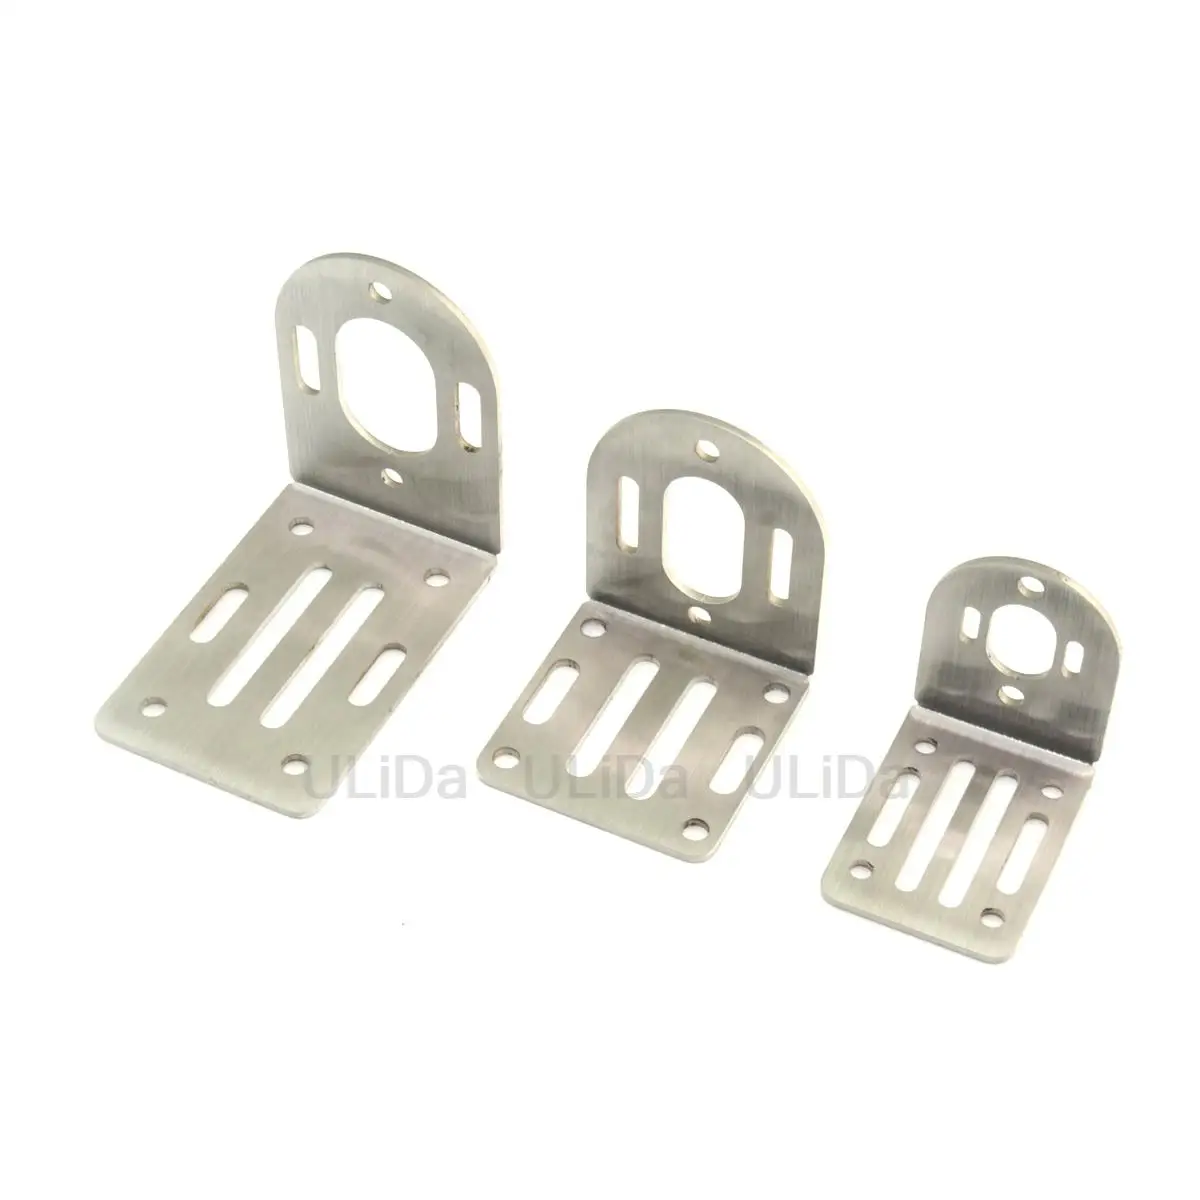 1PCS 380 550 775 Motor Mount Base Adjustable Height Support Bracket Engine Stainless Steel Fixed Seat for RC Boat Model Parts